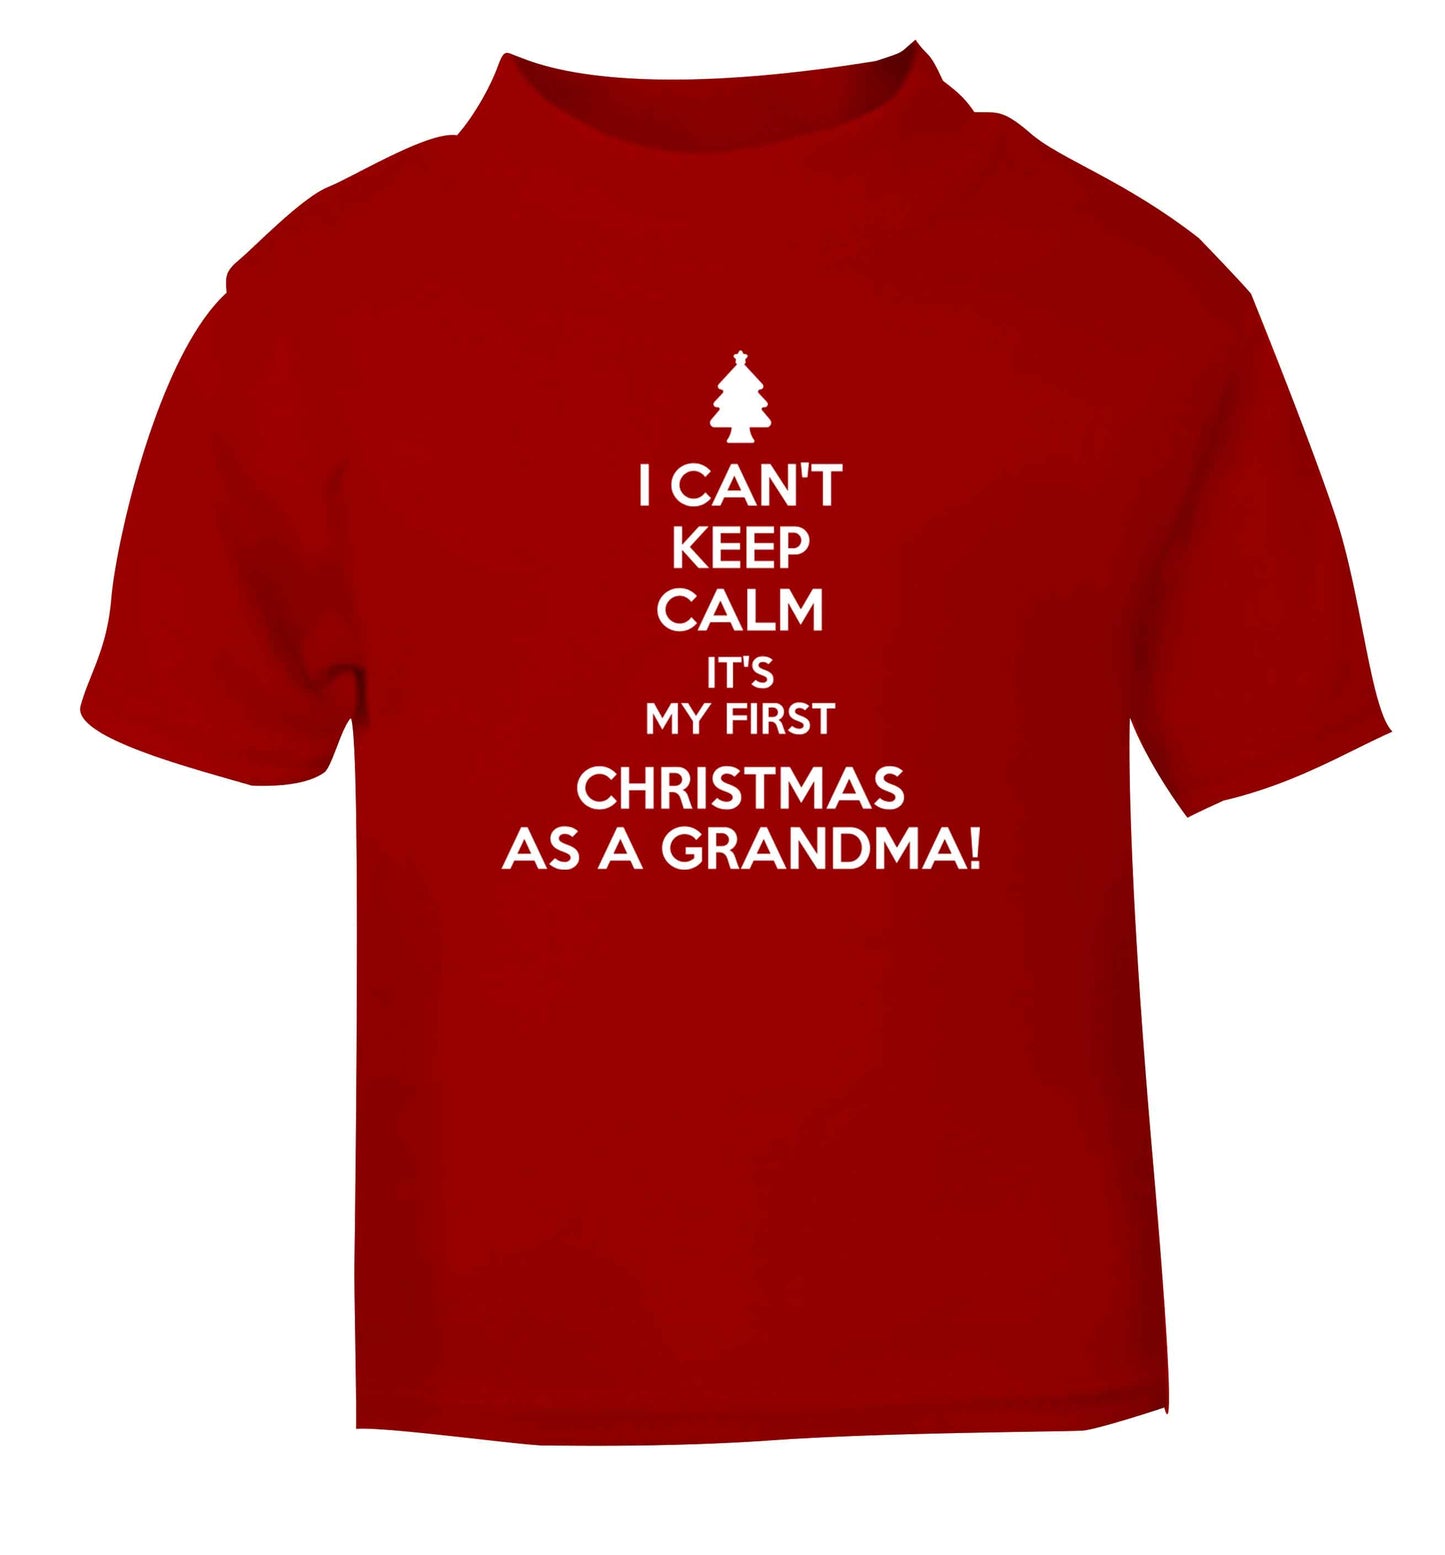 I can't keep calm it's my first Christmas as a grandma! red Baby Toddler Tshirt 2 Years